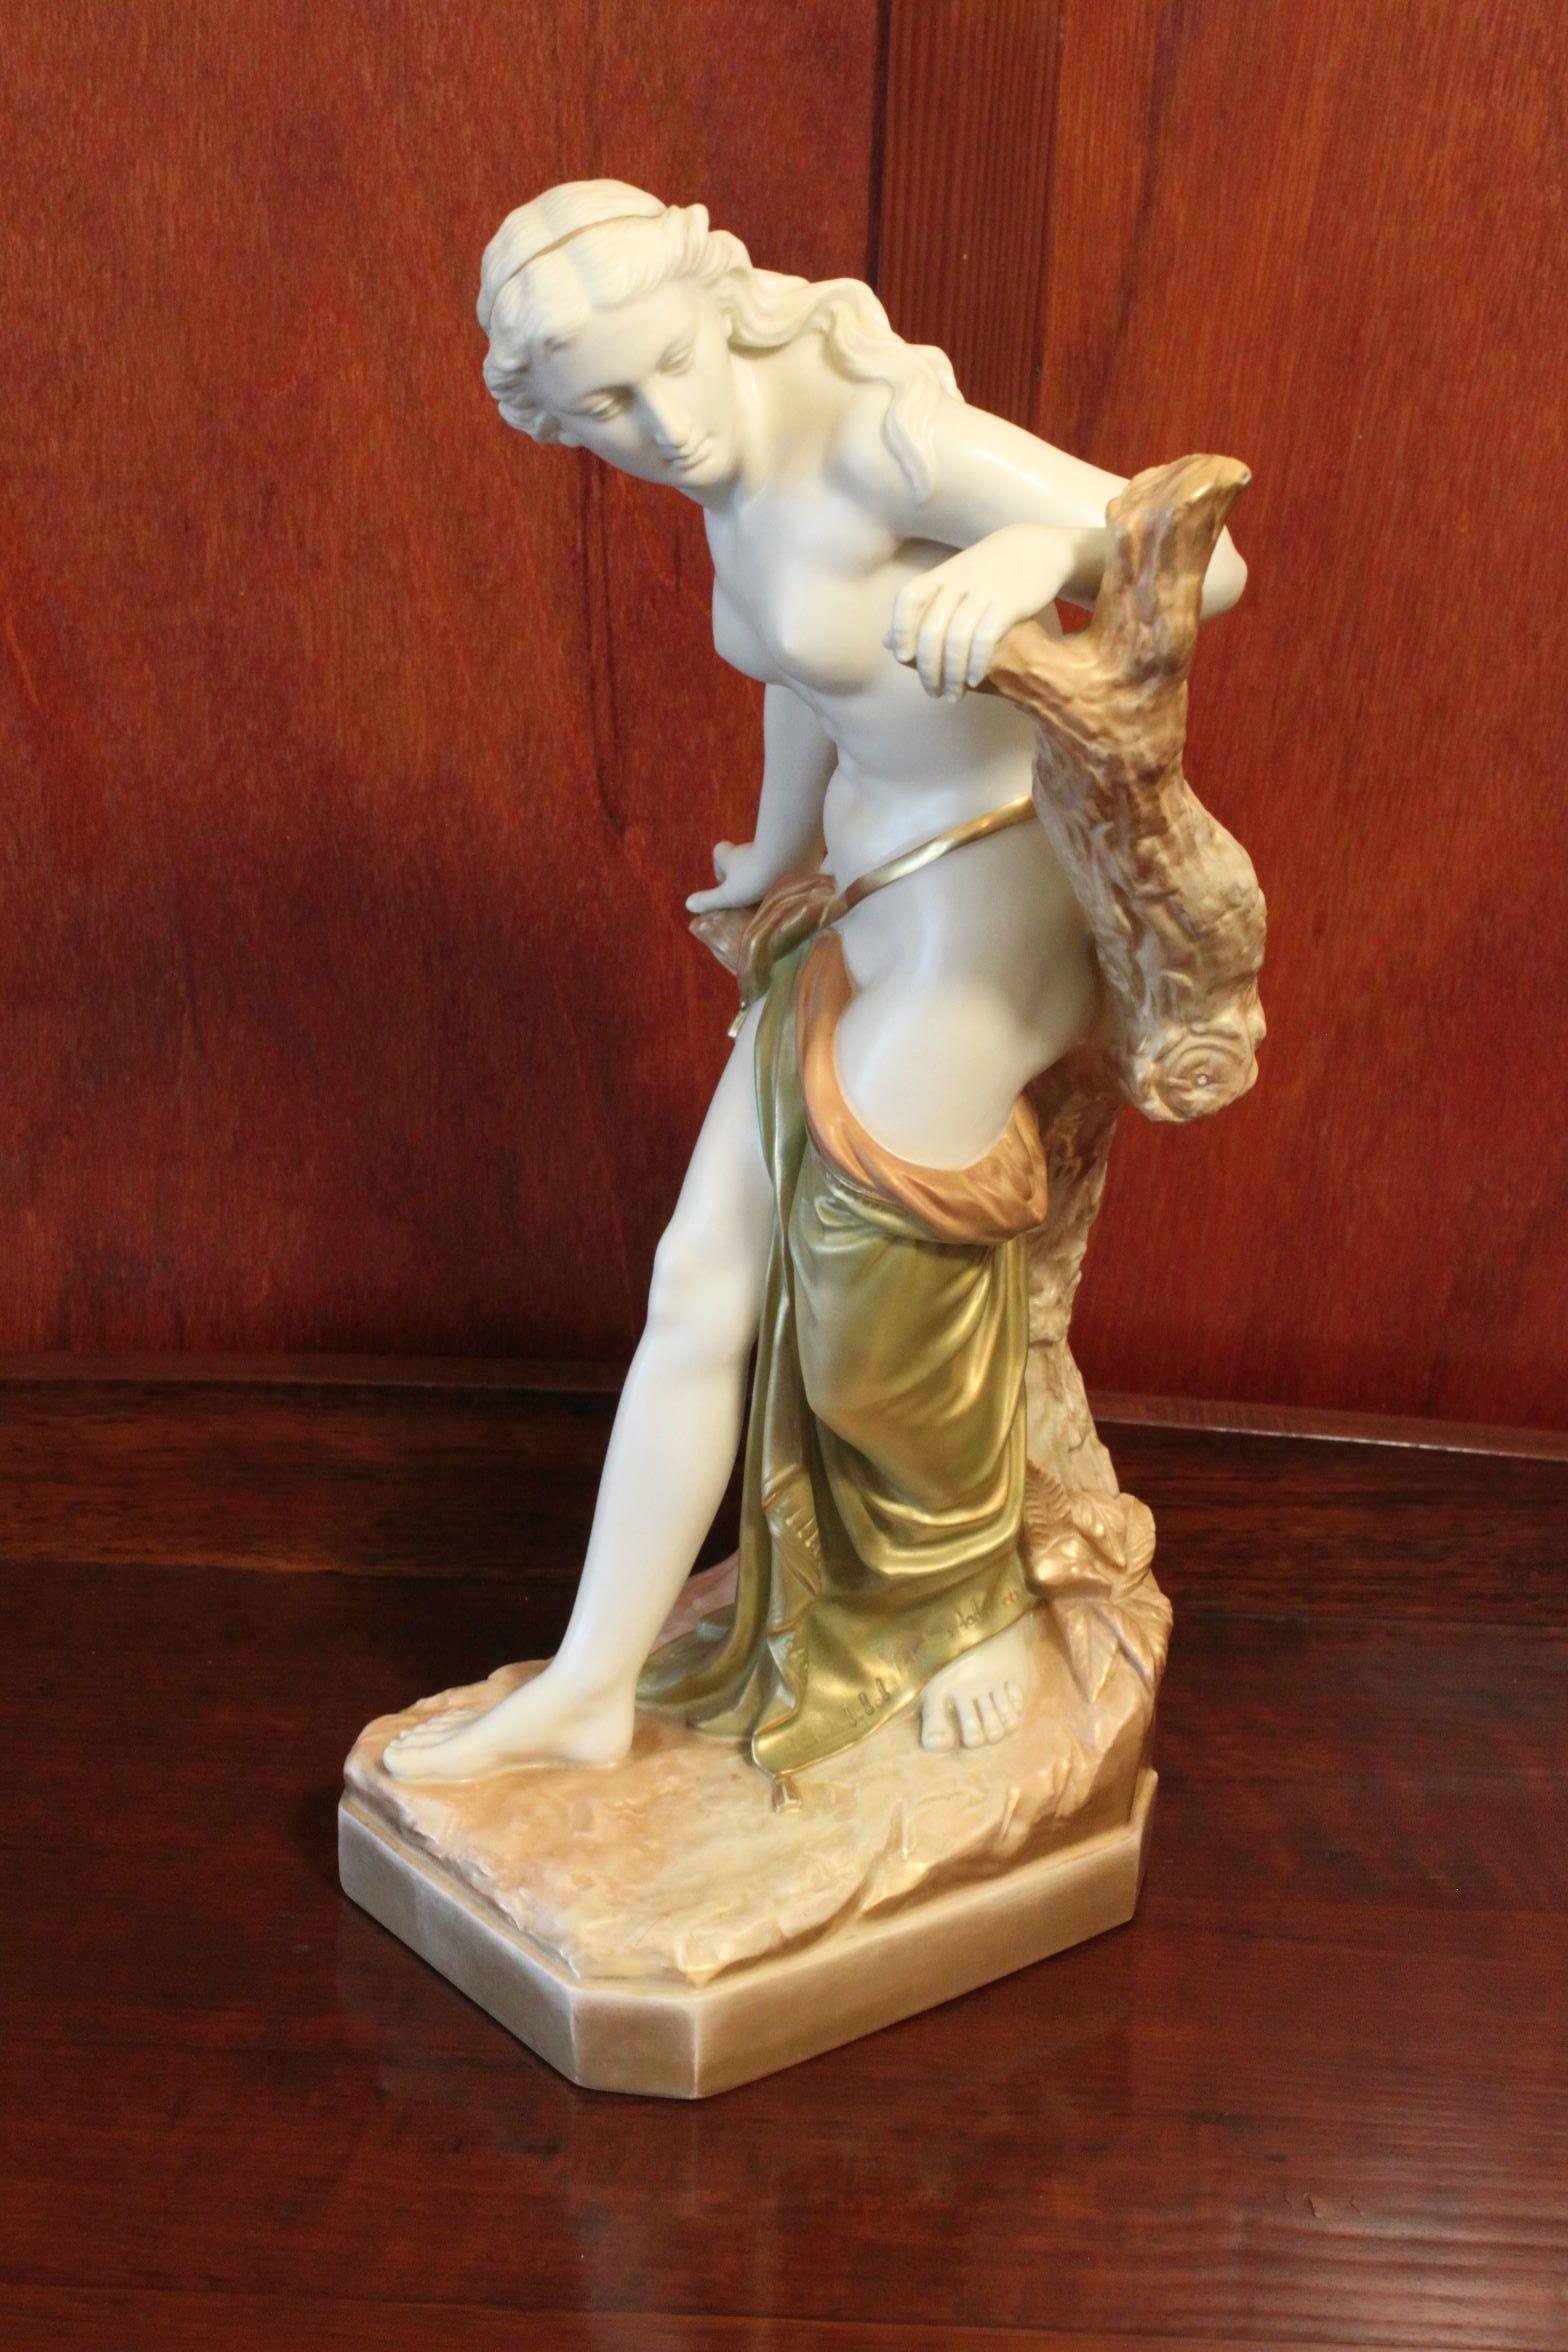 This Royal Worcester figurine is made of glazed parian porcelain and entitled 